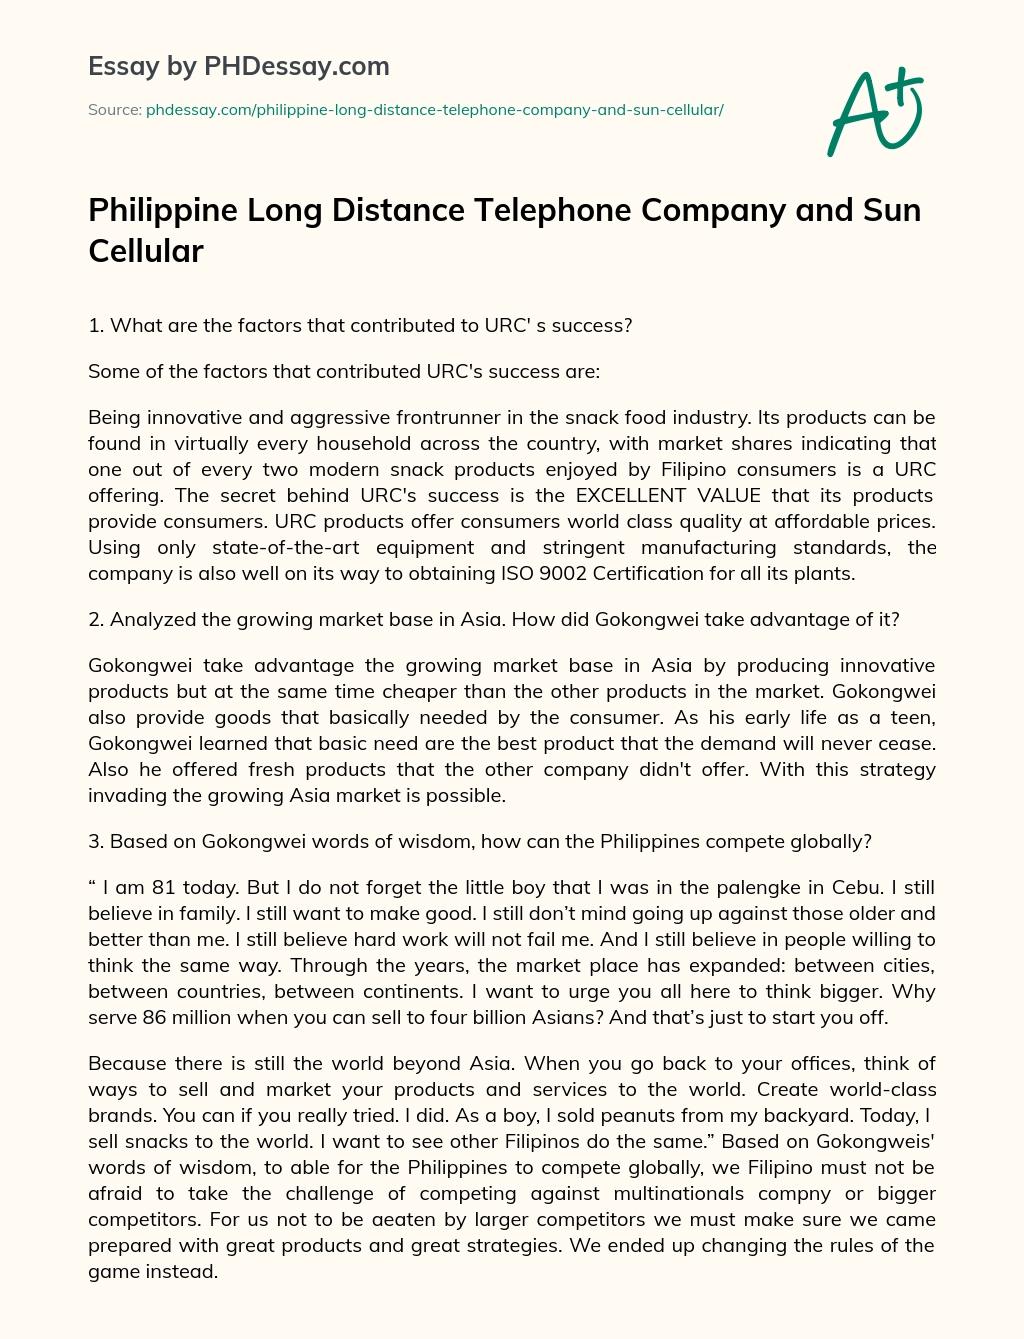 Philippine Long Distance Telephone Company and Sun Cellular essay